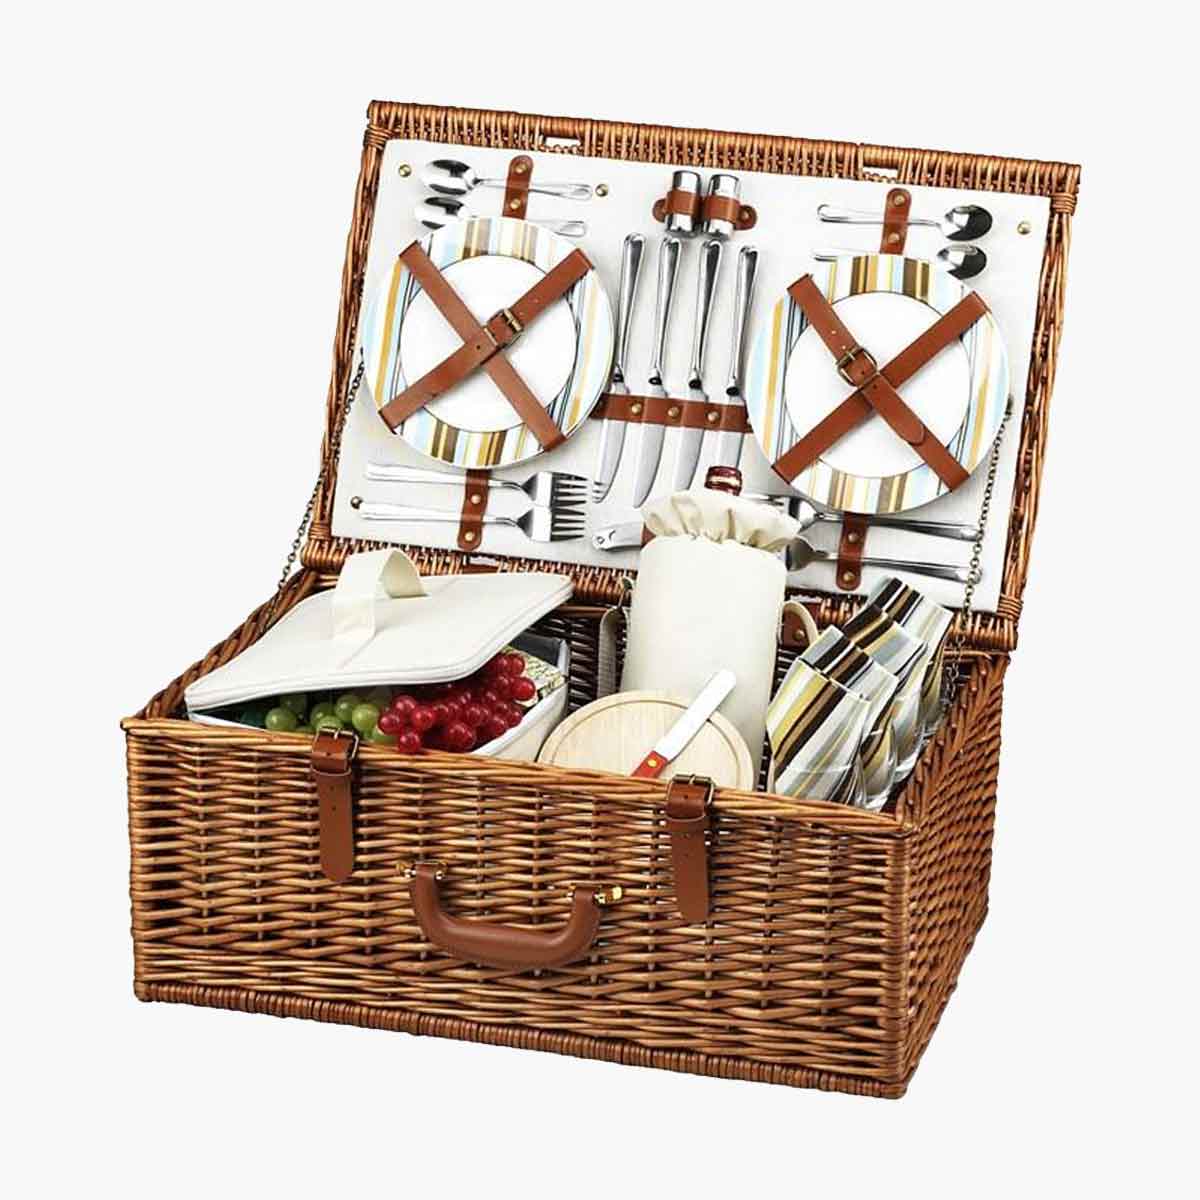 A Dorset picnic basket with service for four.